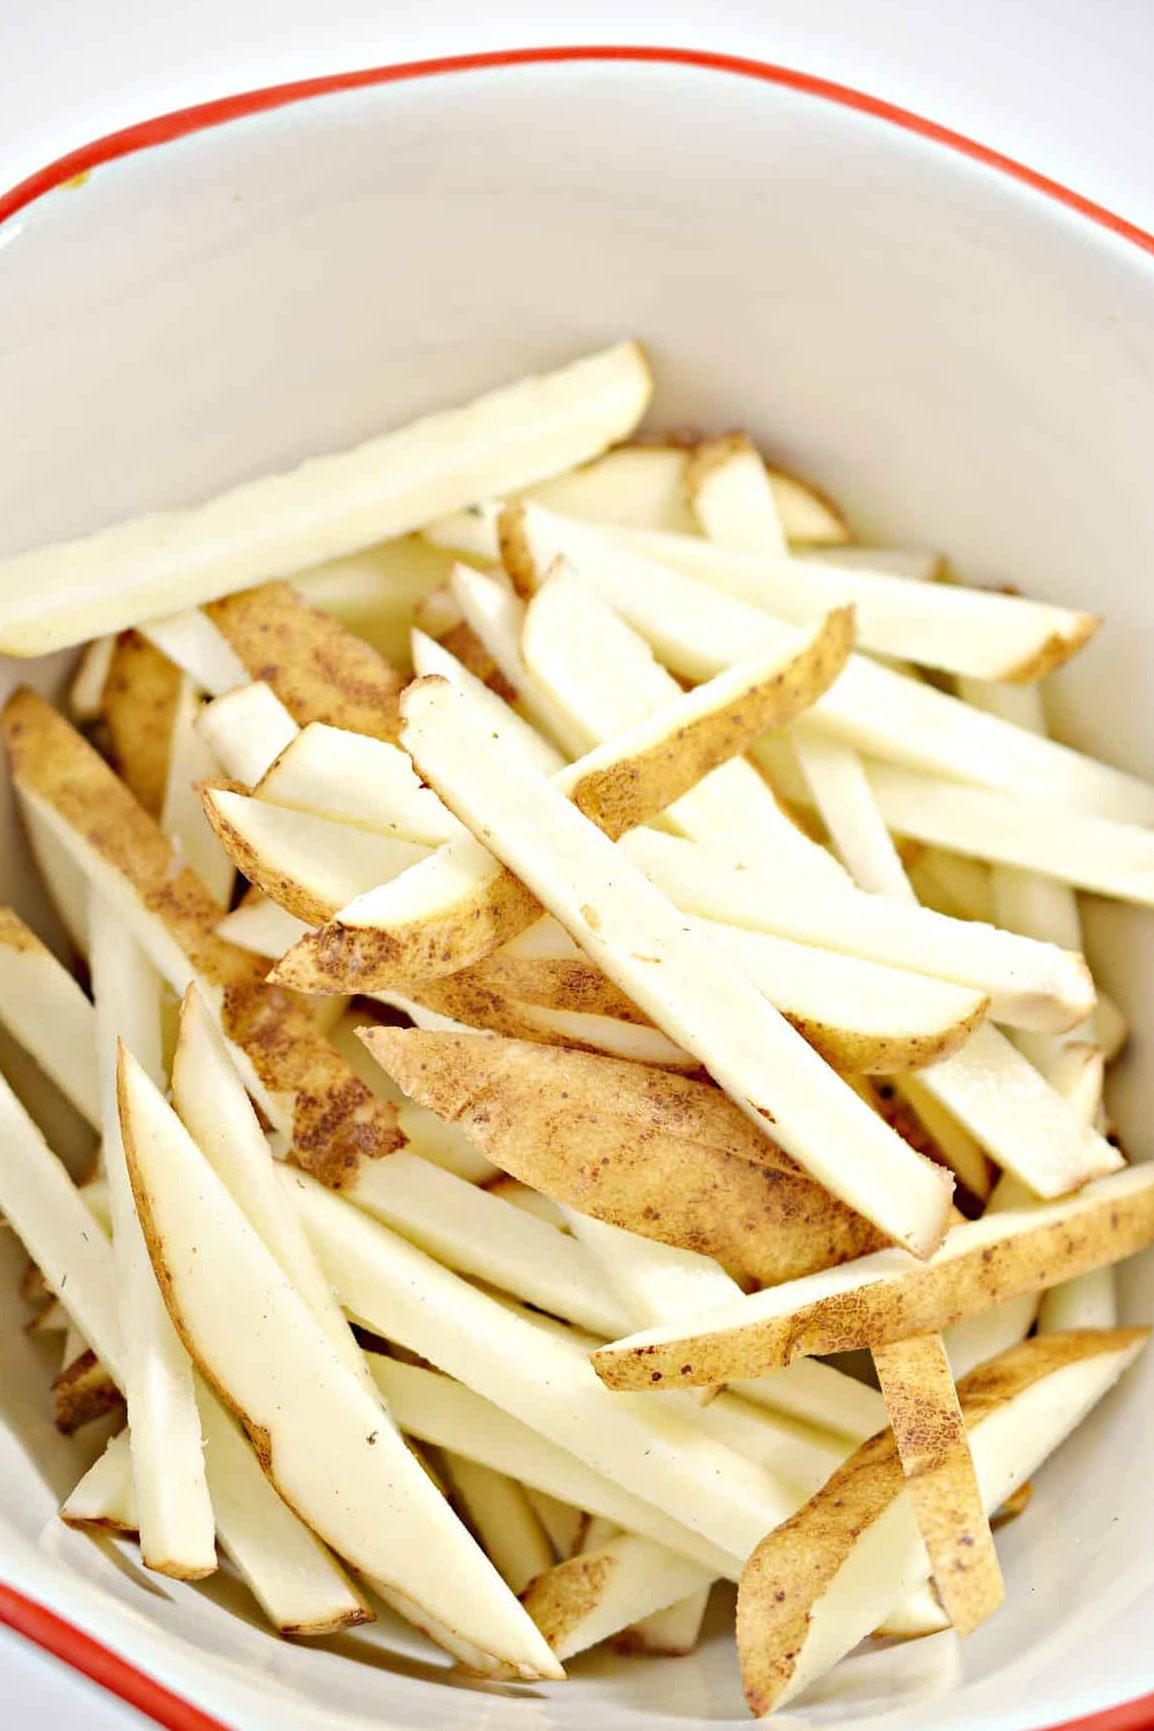 Cut the potatoes into long thin french fry shapes.